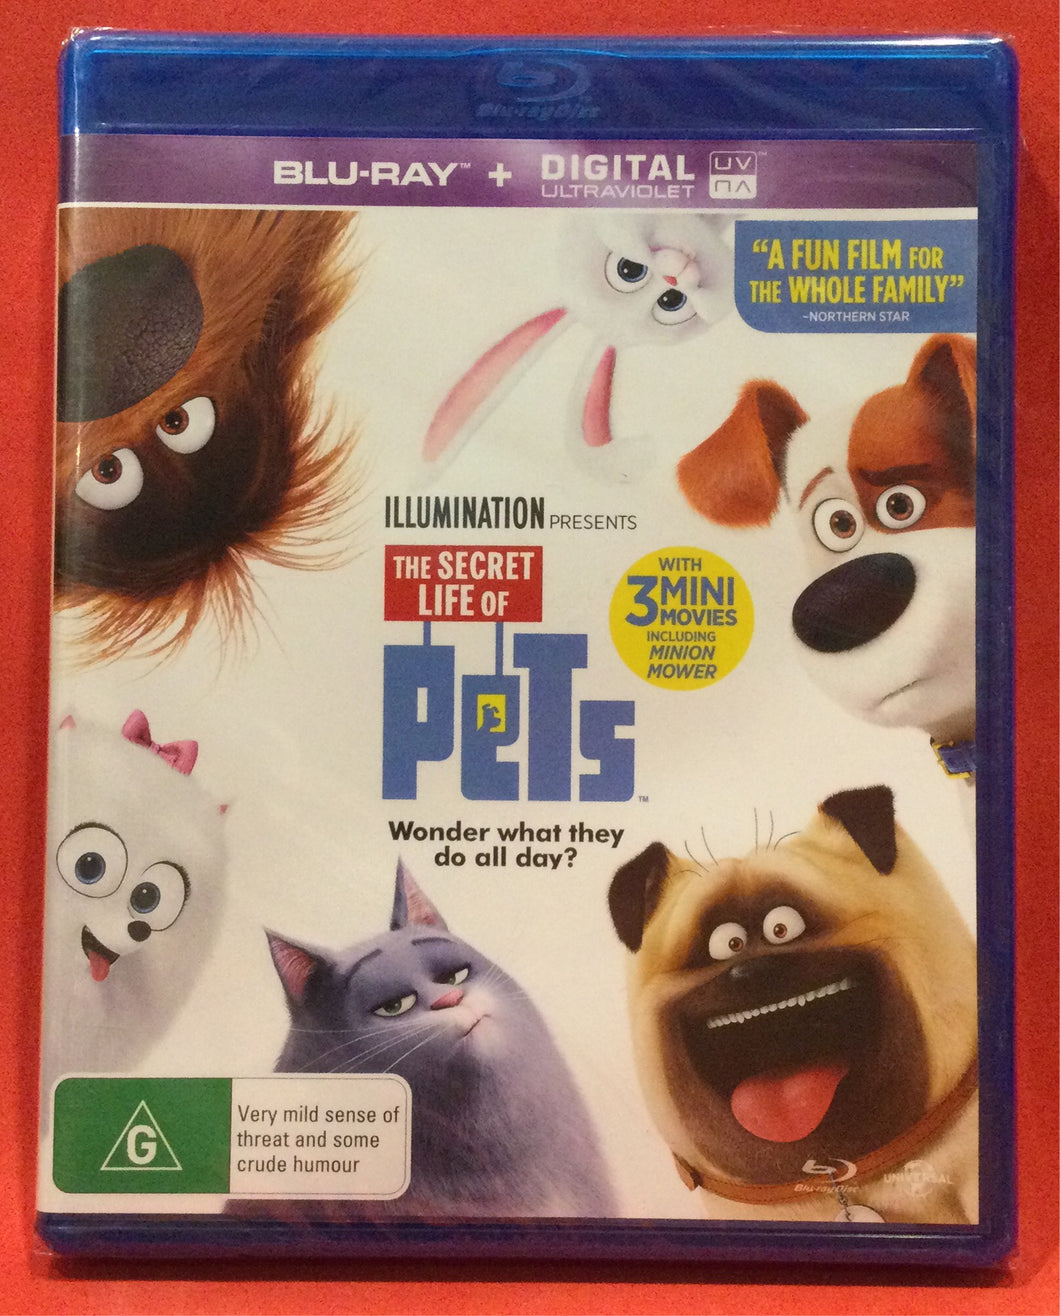 SECRET LIFE OF PETS, THE - BLU-RAY - DVD (SEALED)